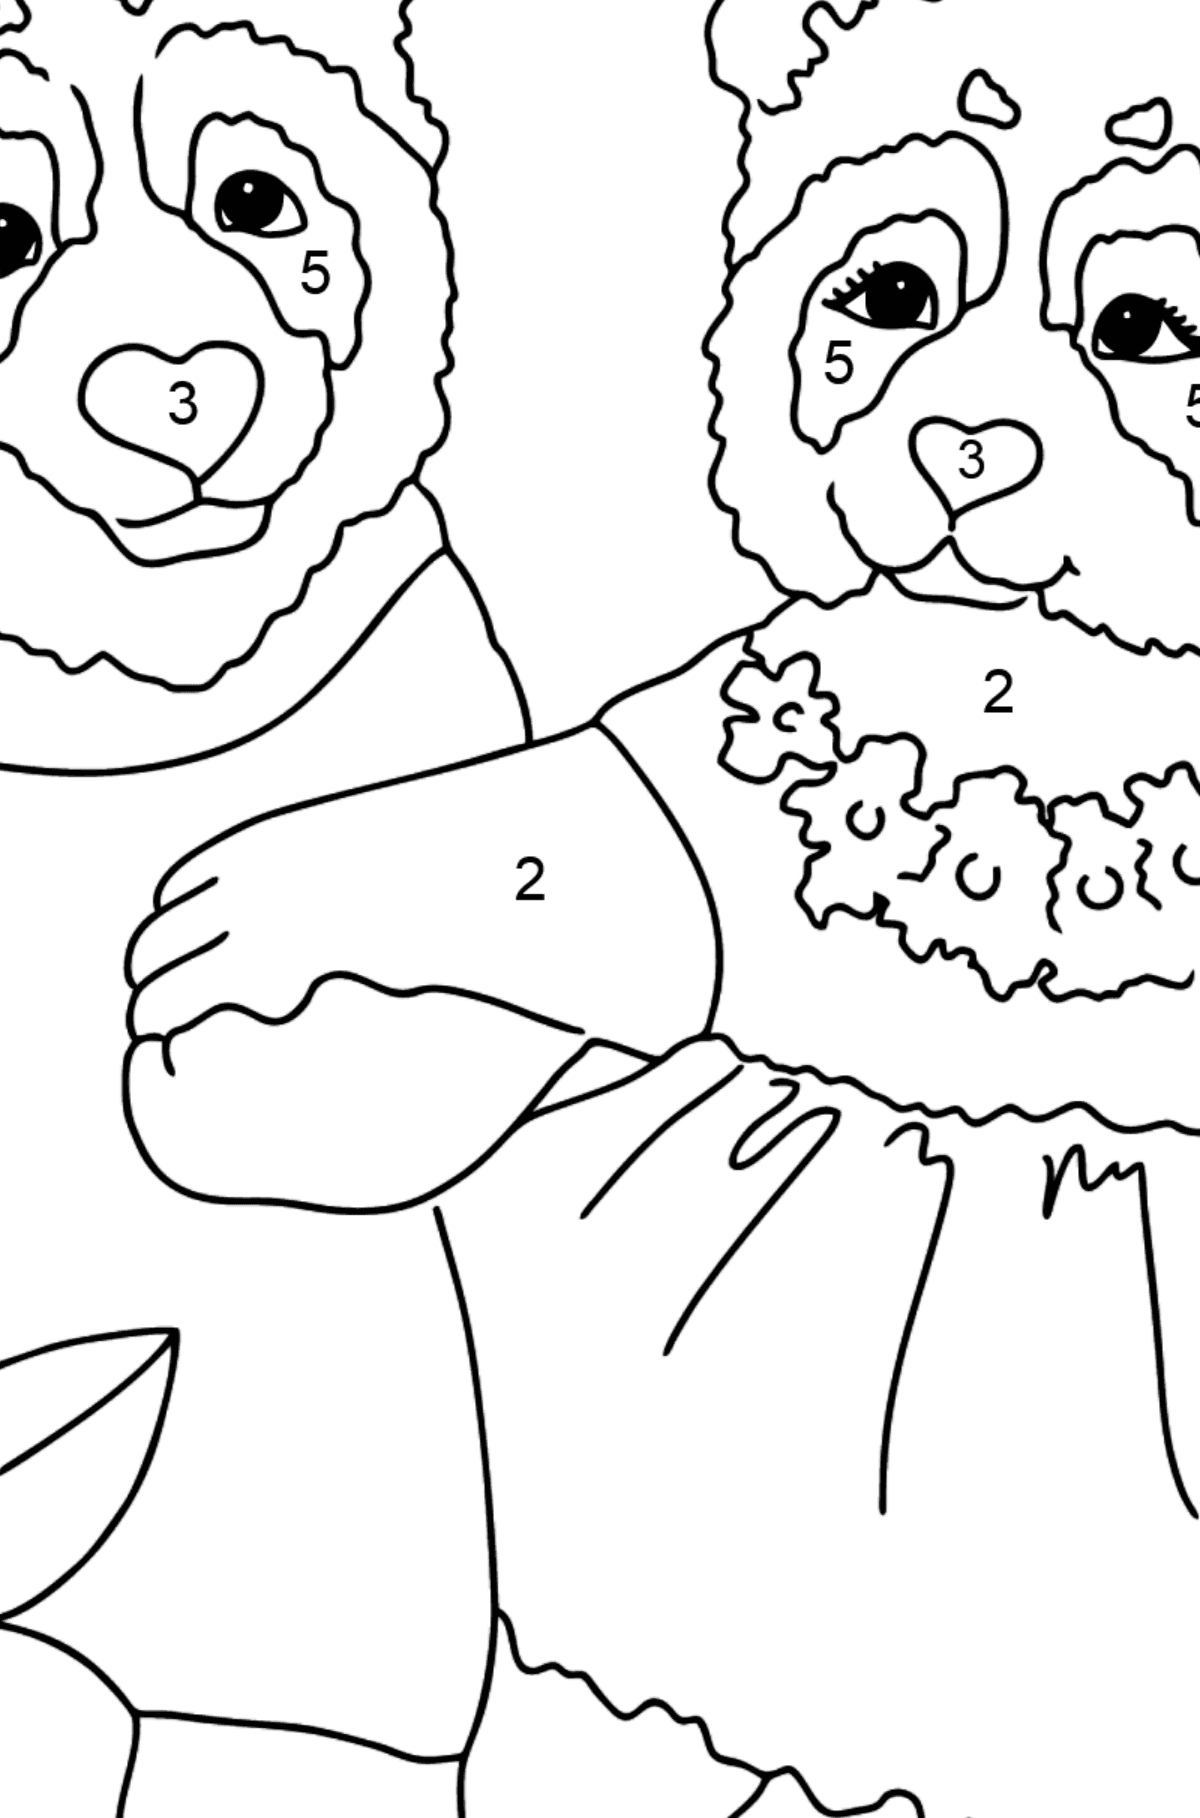 Coloring Page - Pandas Taking a Walk - Coloring by Numbers for Kids